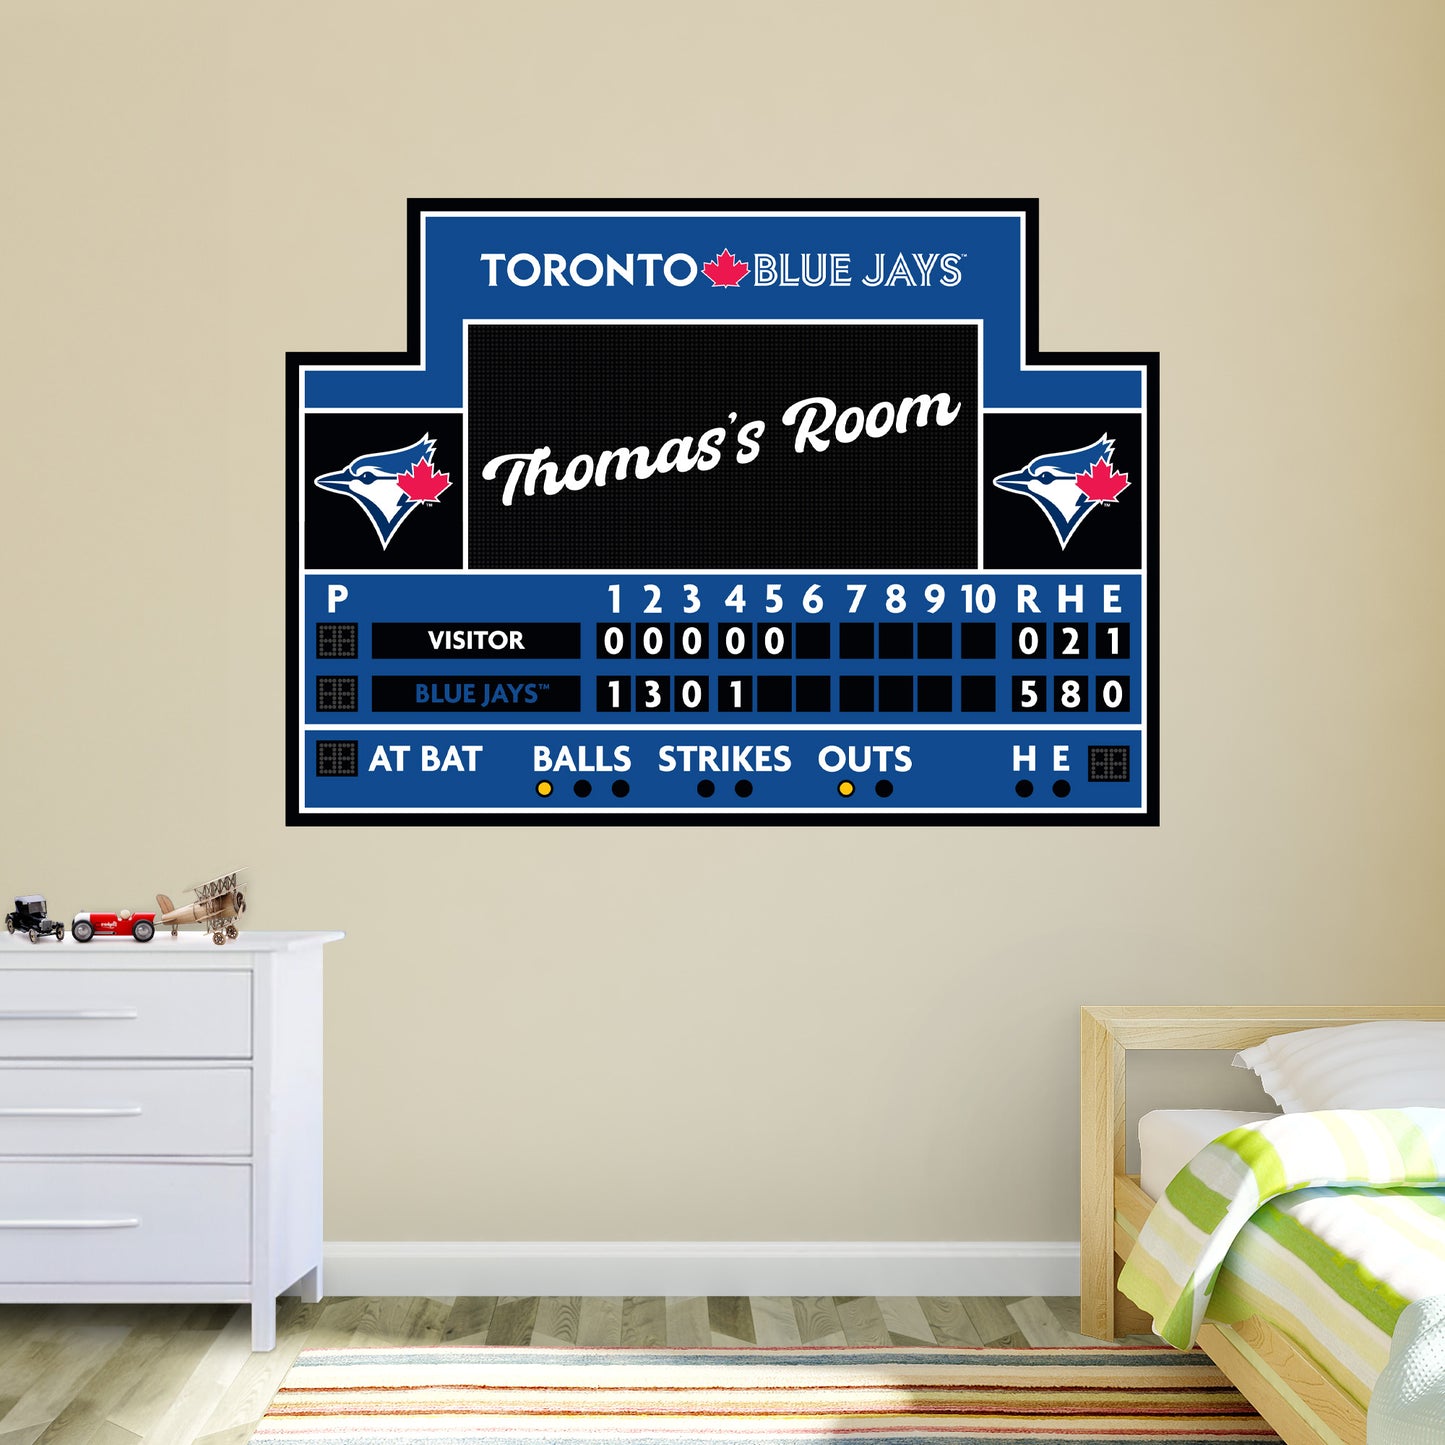 Toronto Blue Jays: Scoreboard Personalized Name        - Officially Licensed MLB Removable     Adhesive Decal